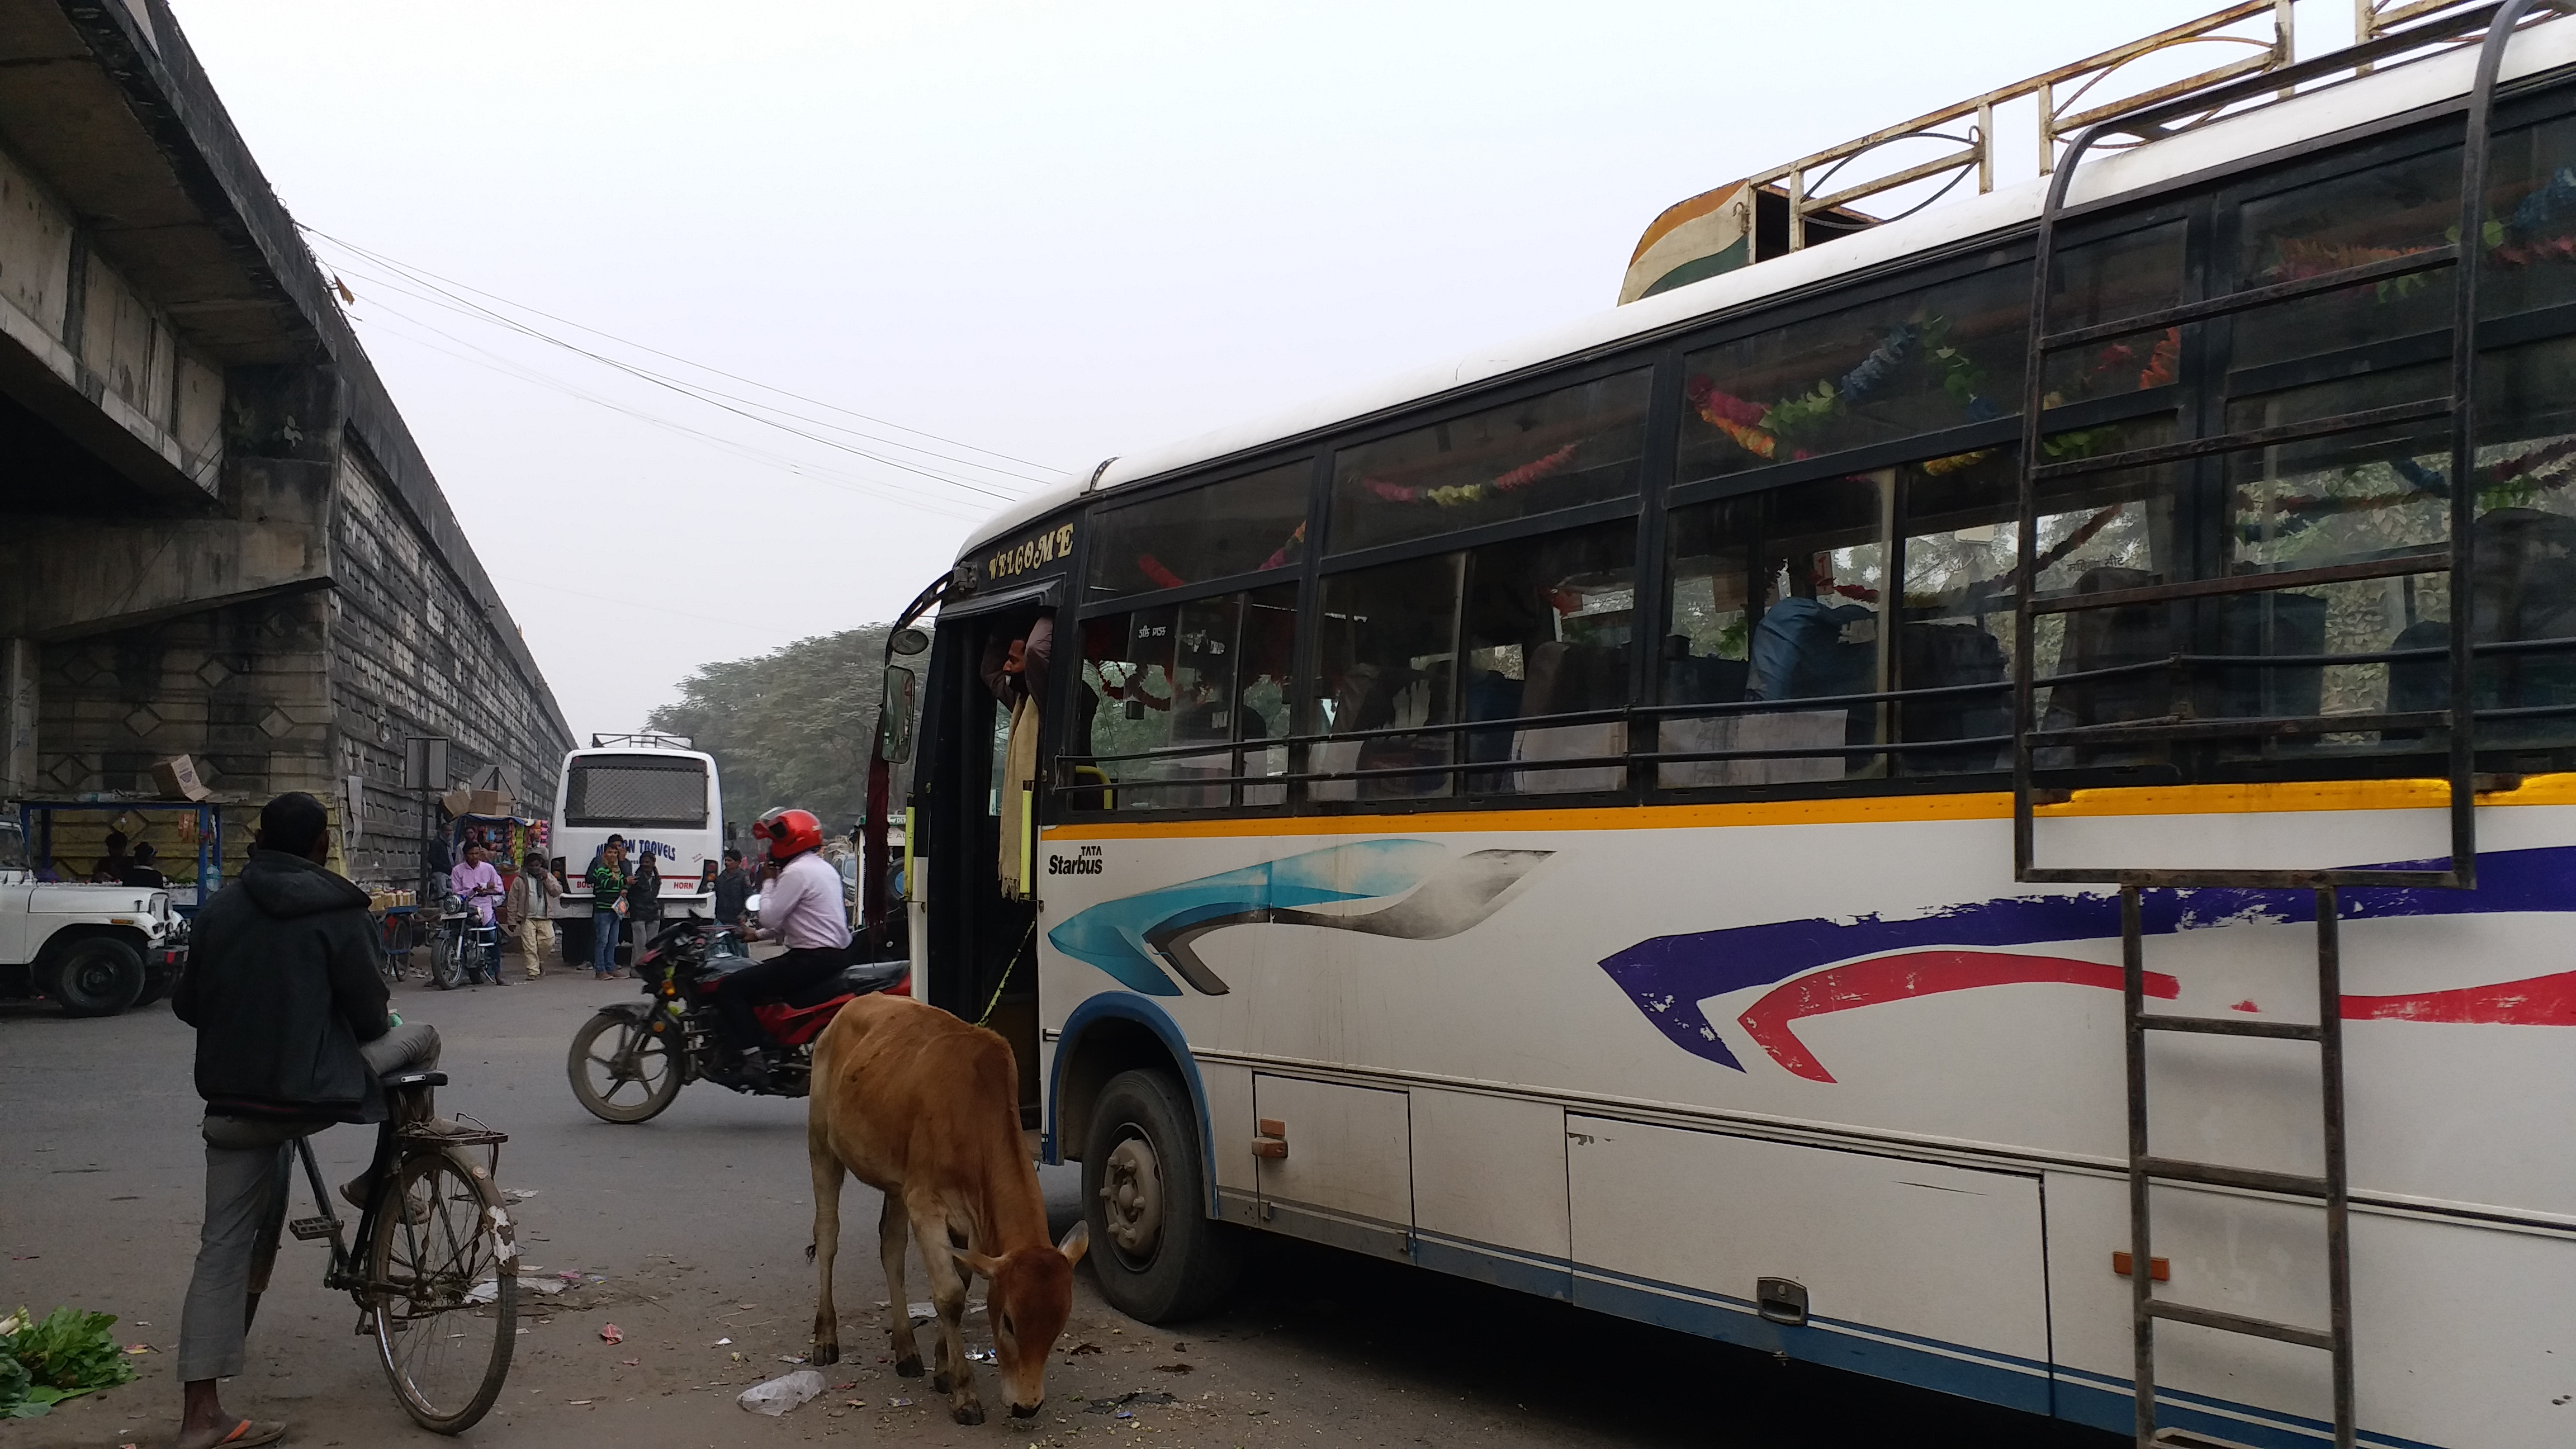 Good news for Araria people, the way to build a permanent bus stand is clear